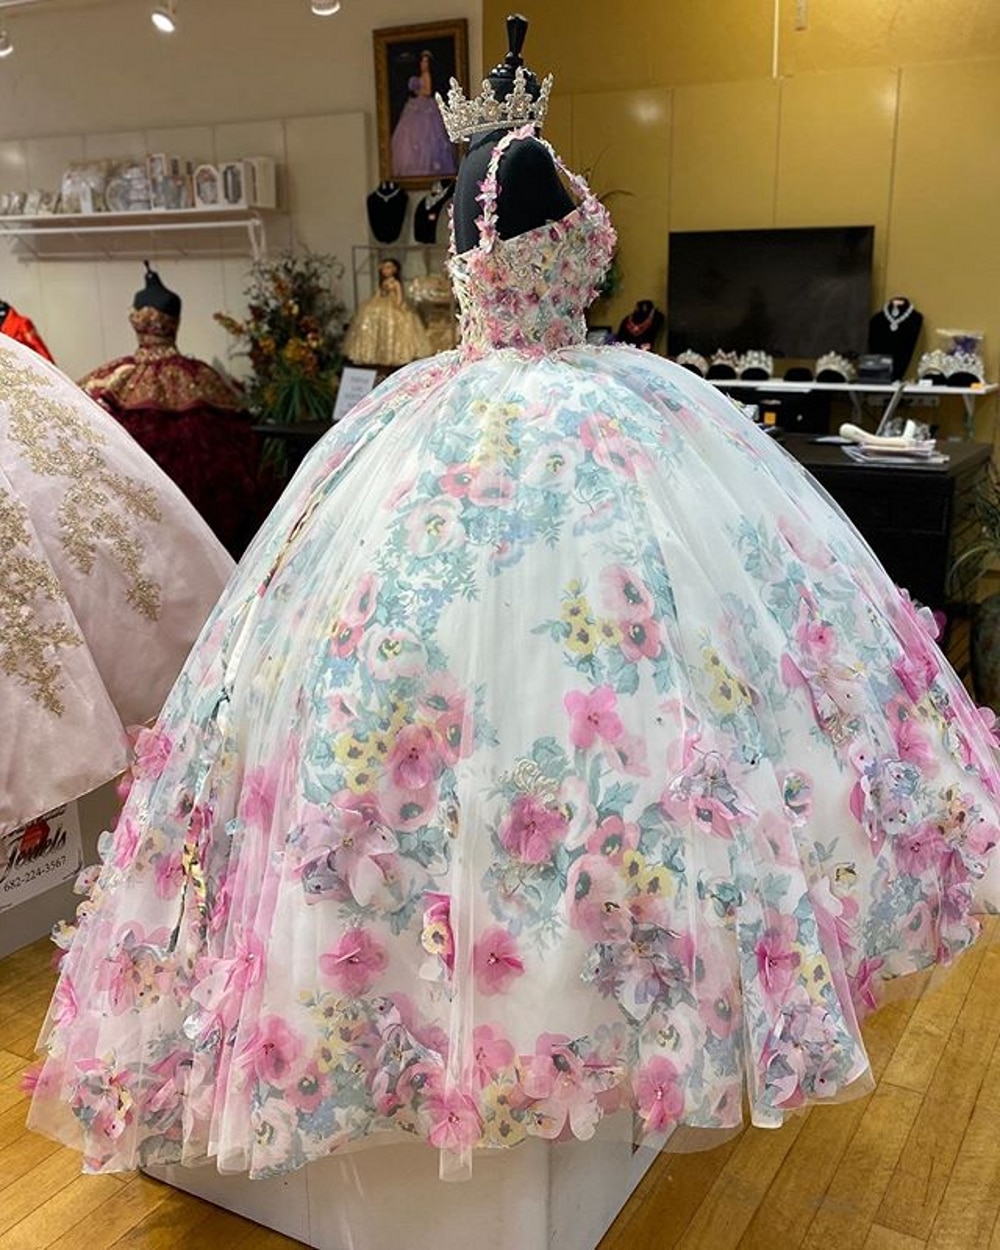 2021 quinceanera dress,quinceanera dress with flowers,multi colored quinceanera dress,colorful quinceanera dress,mexican big poofy quinceanera dress,poofy quinceanera dress,quinceanera dress with 3d flowers,most beautiful quinceanera dress flowers theme,beautiful quinceanera dress on mannequin,